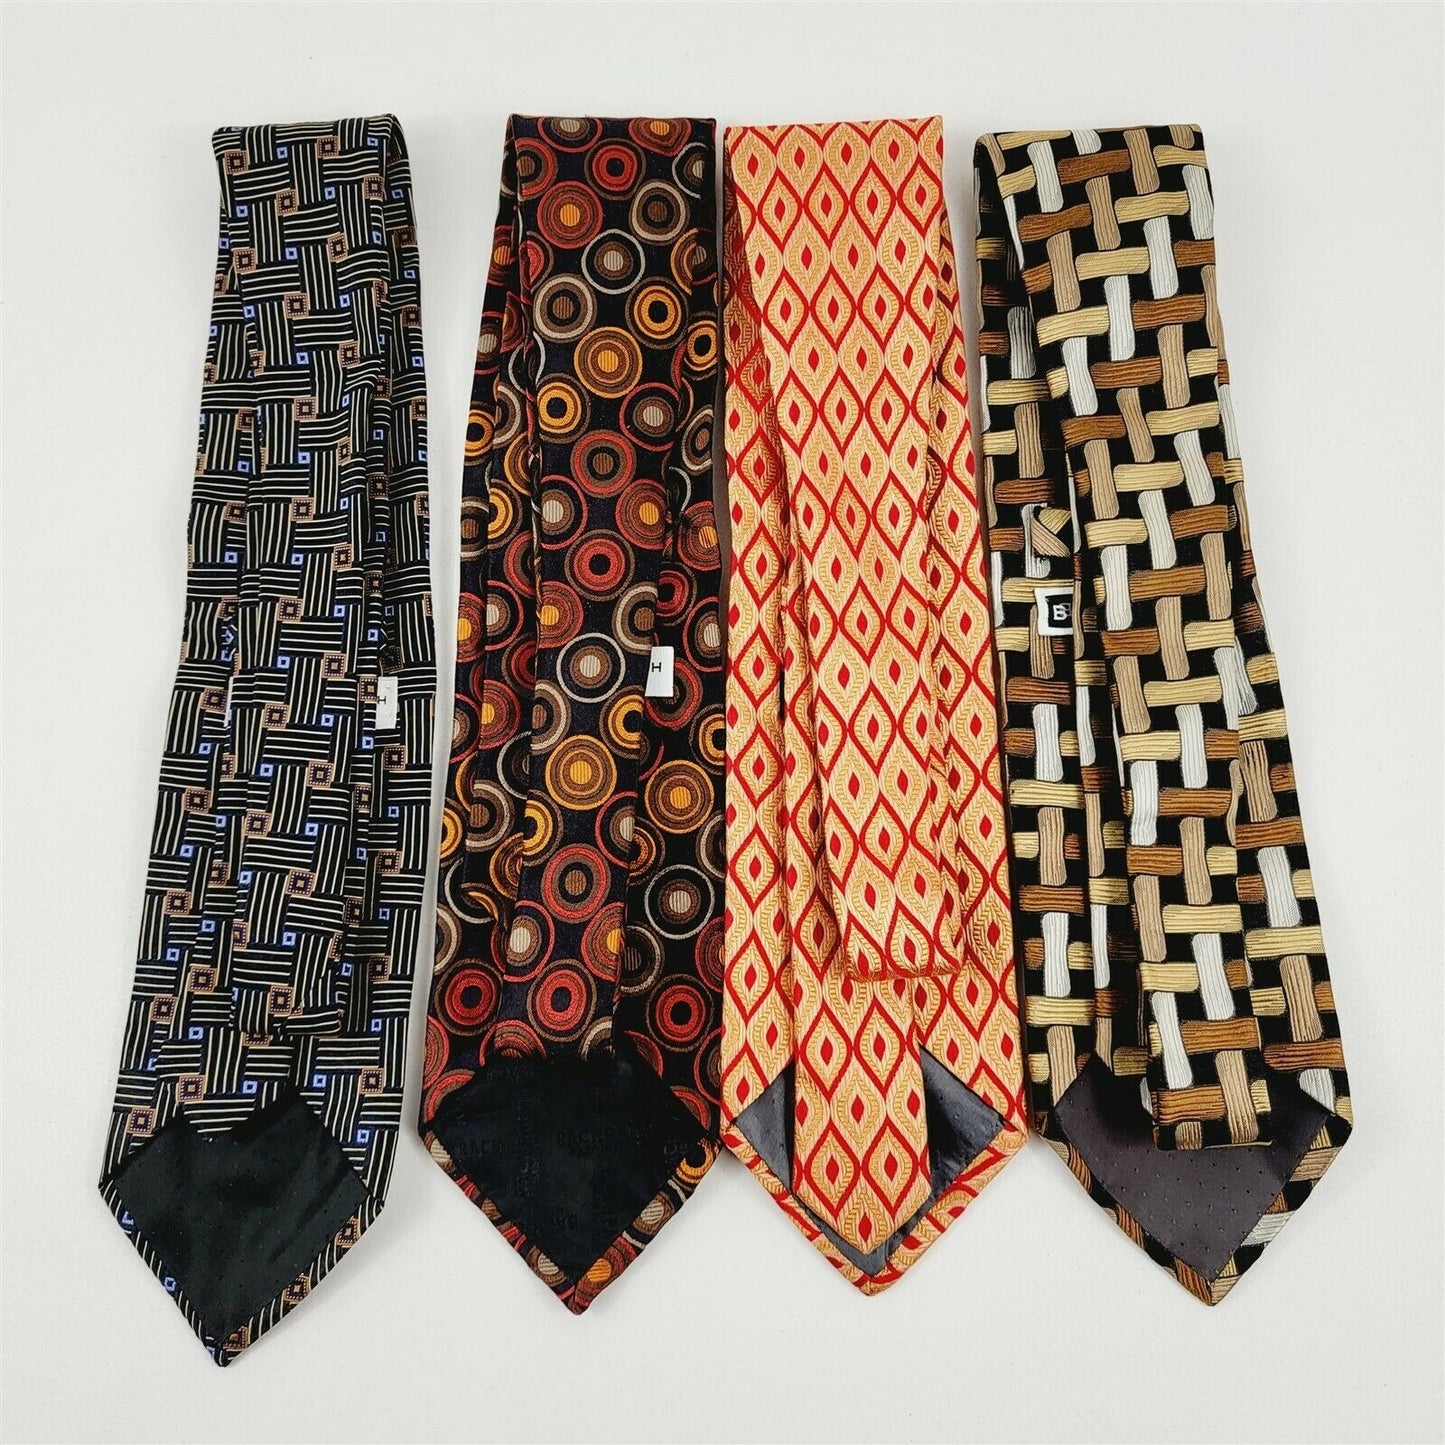 4 Vintage Bachrach Silk Mens Neck Ties Italy - Red Gold Black Brown